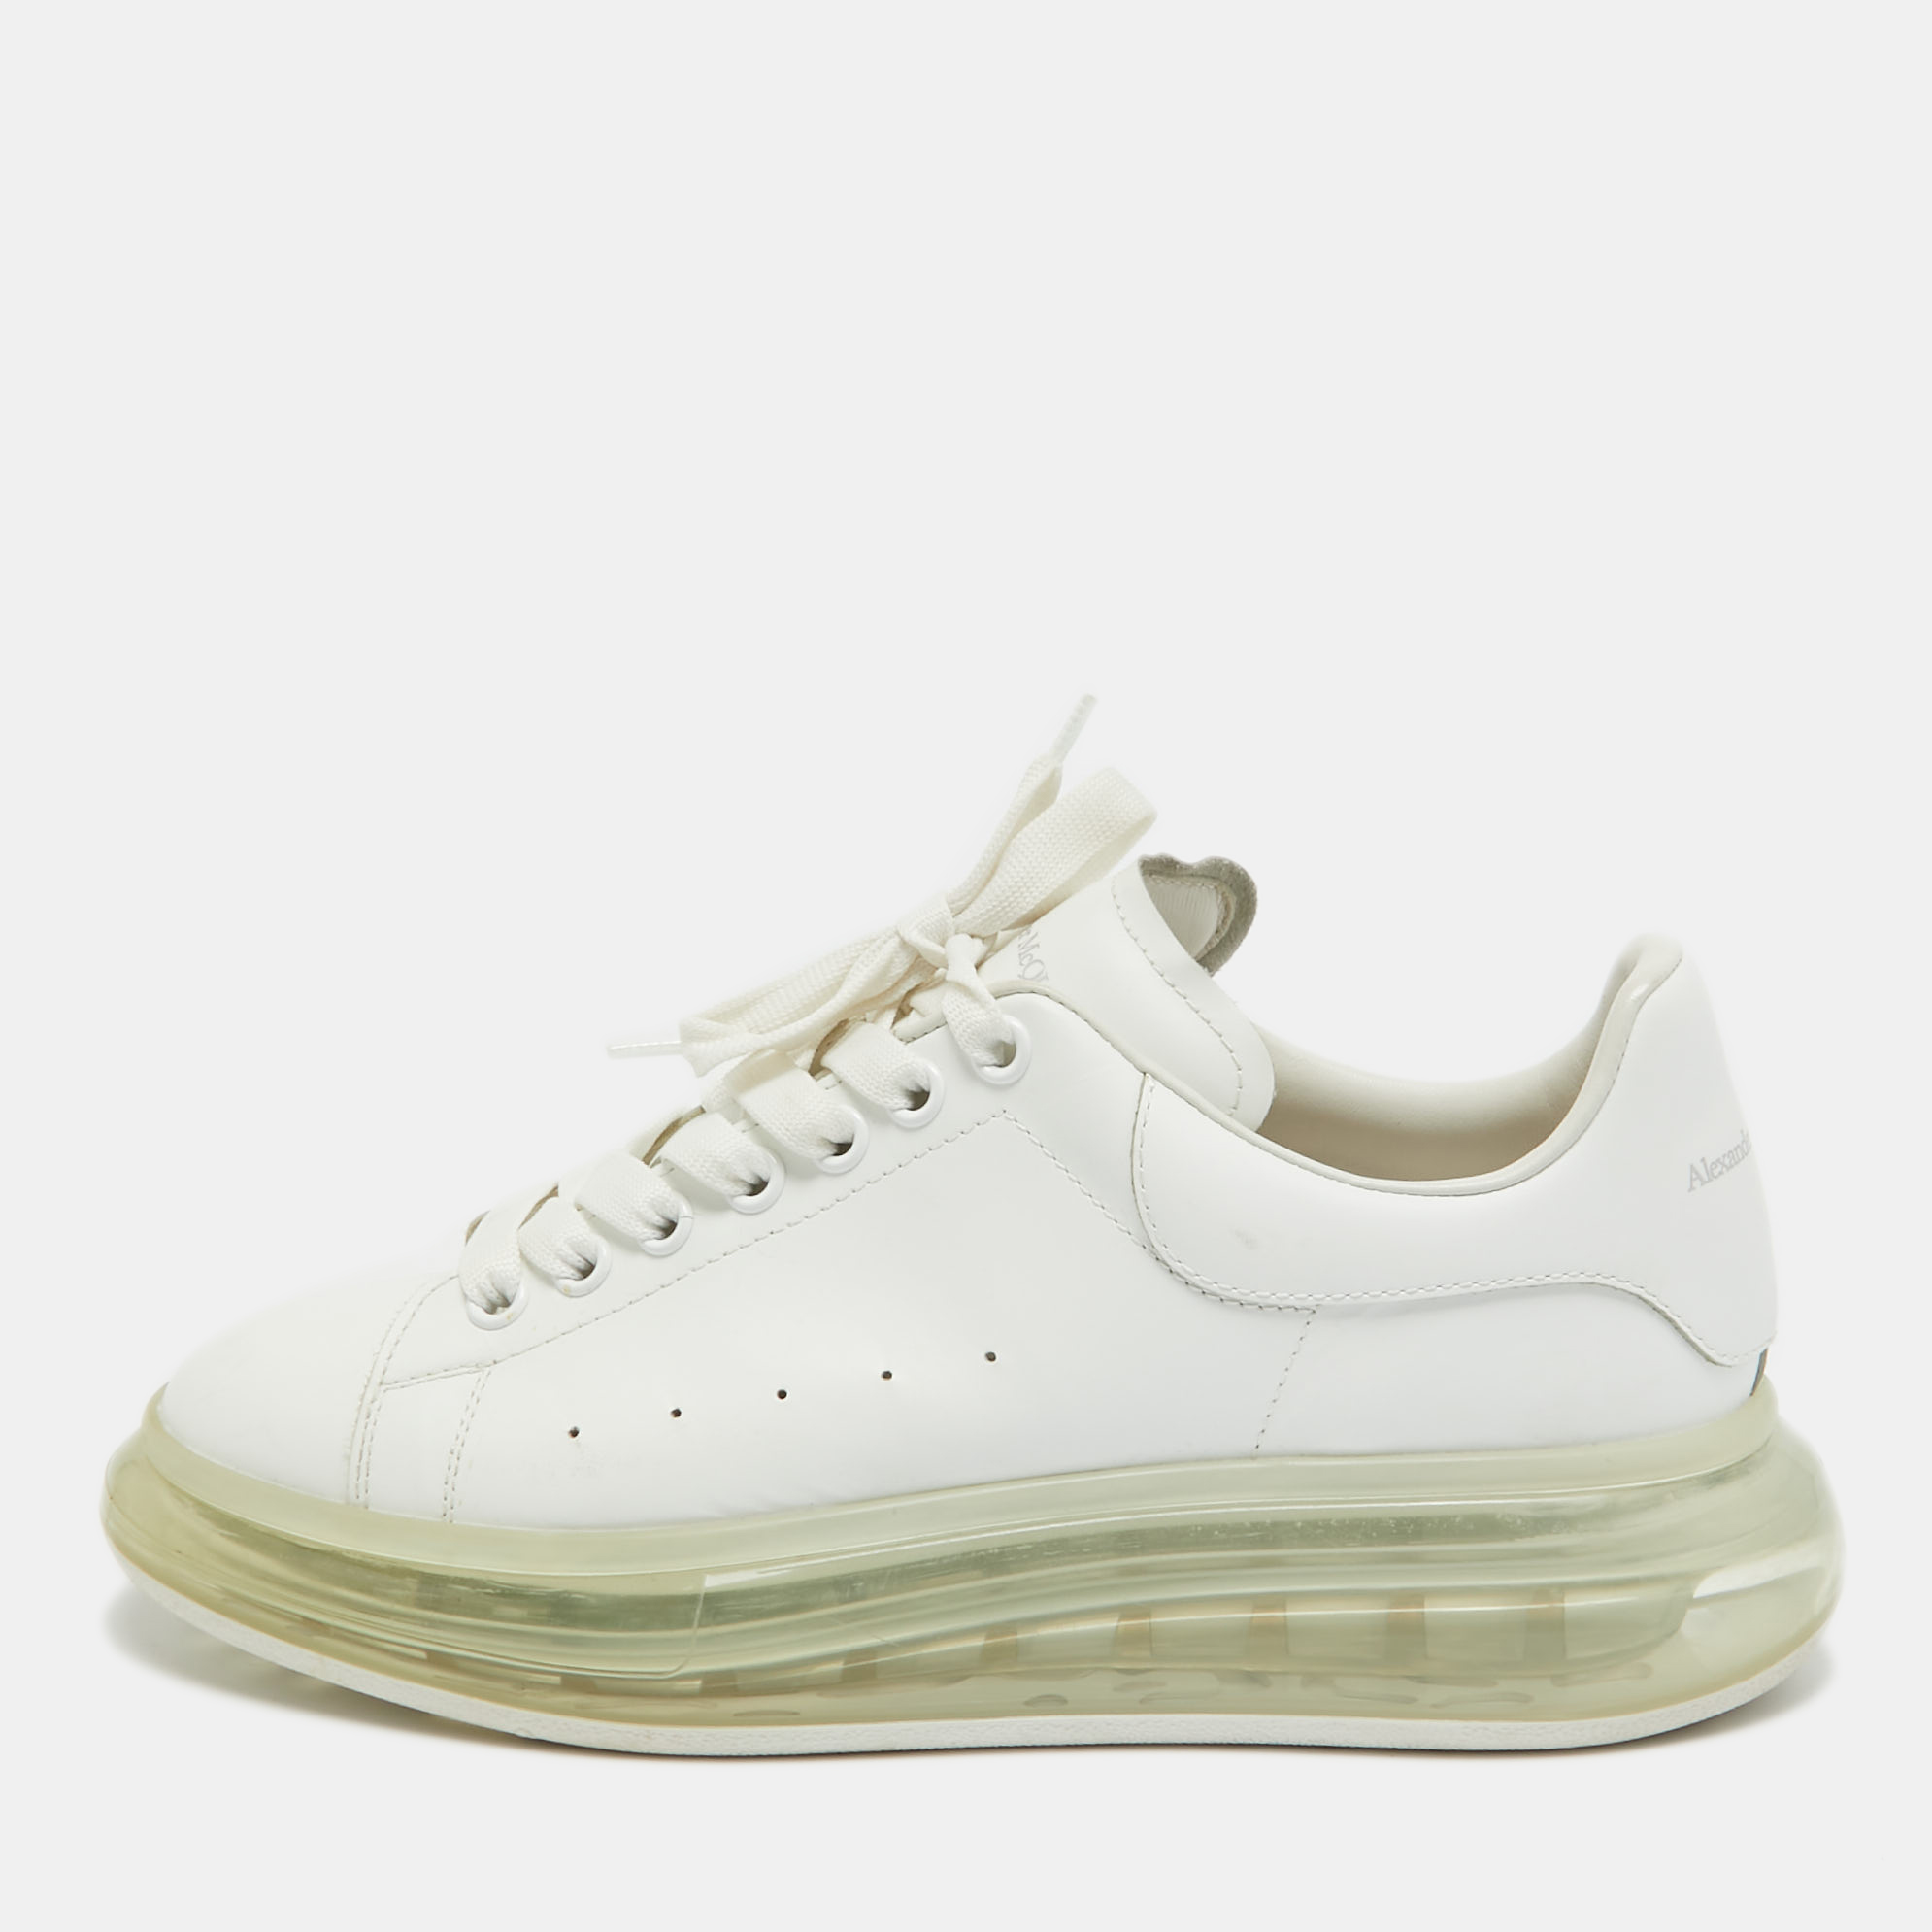 Alexander mcqueen white leather oversized transparent sole sneakers size 42.5